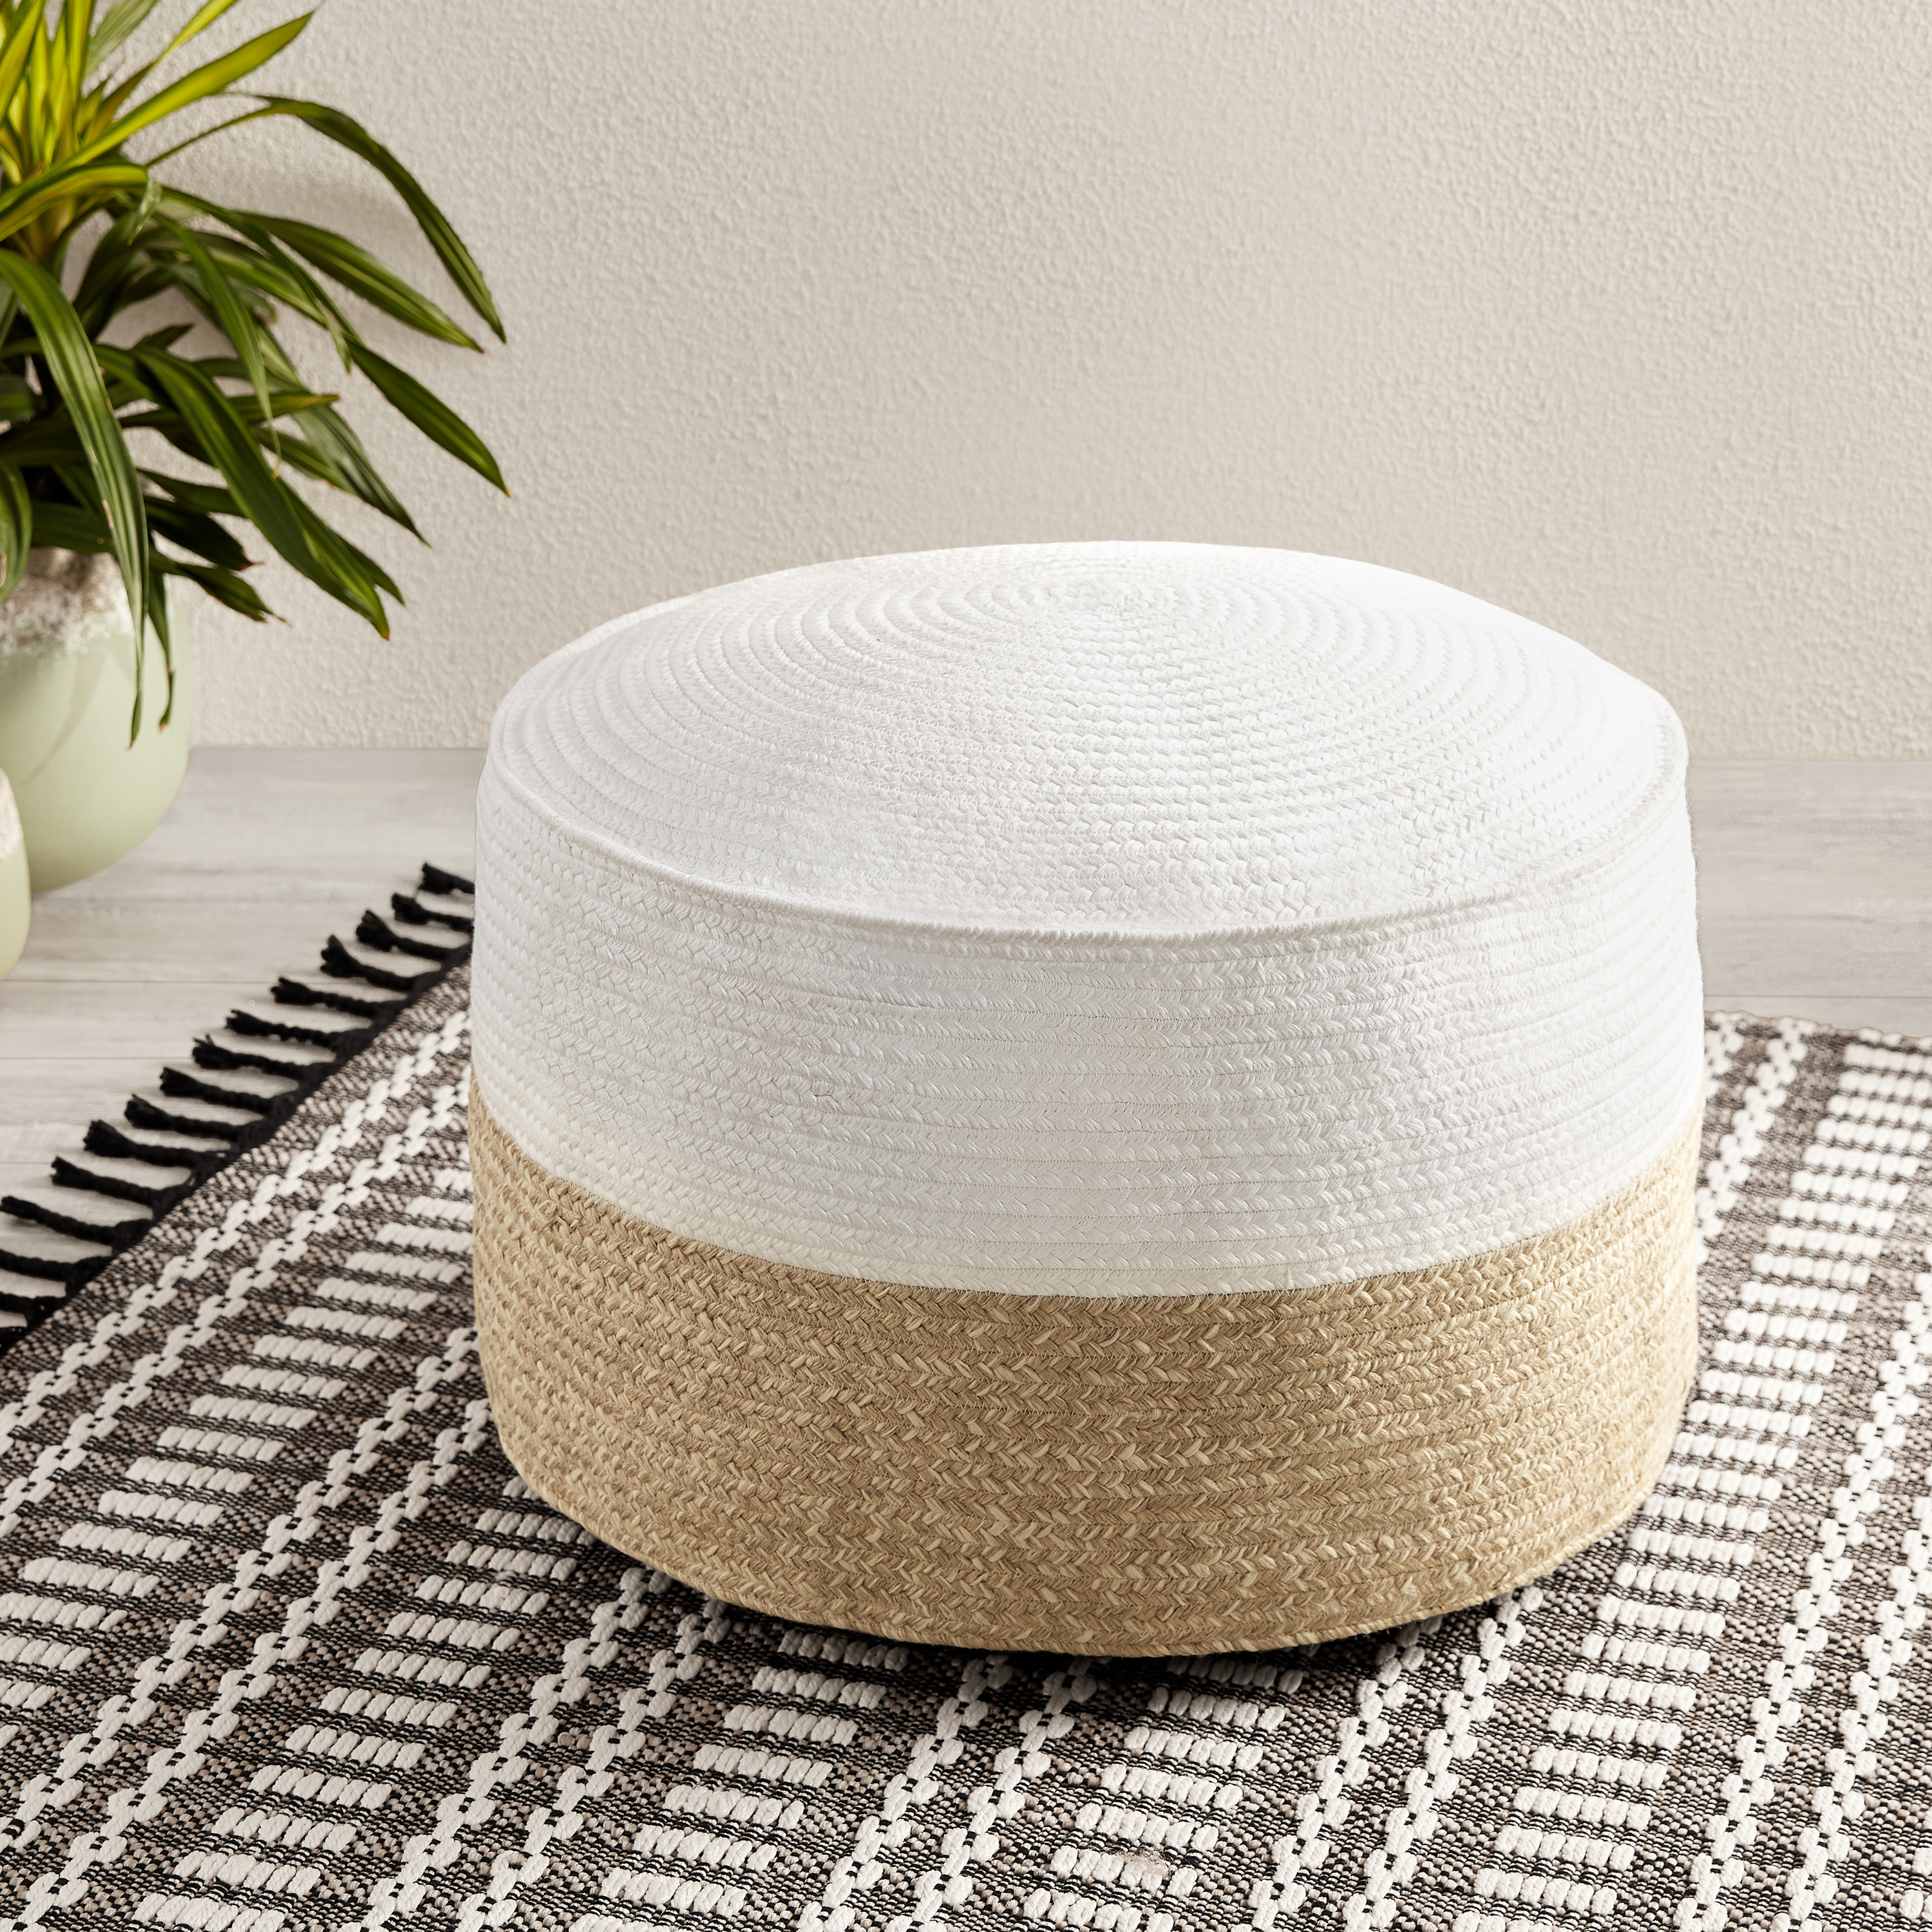 D&JM Brown and Ivory Round Outdoor Pouf Ottoman - image 2 of 9